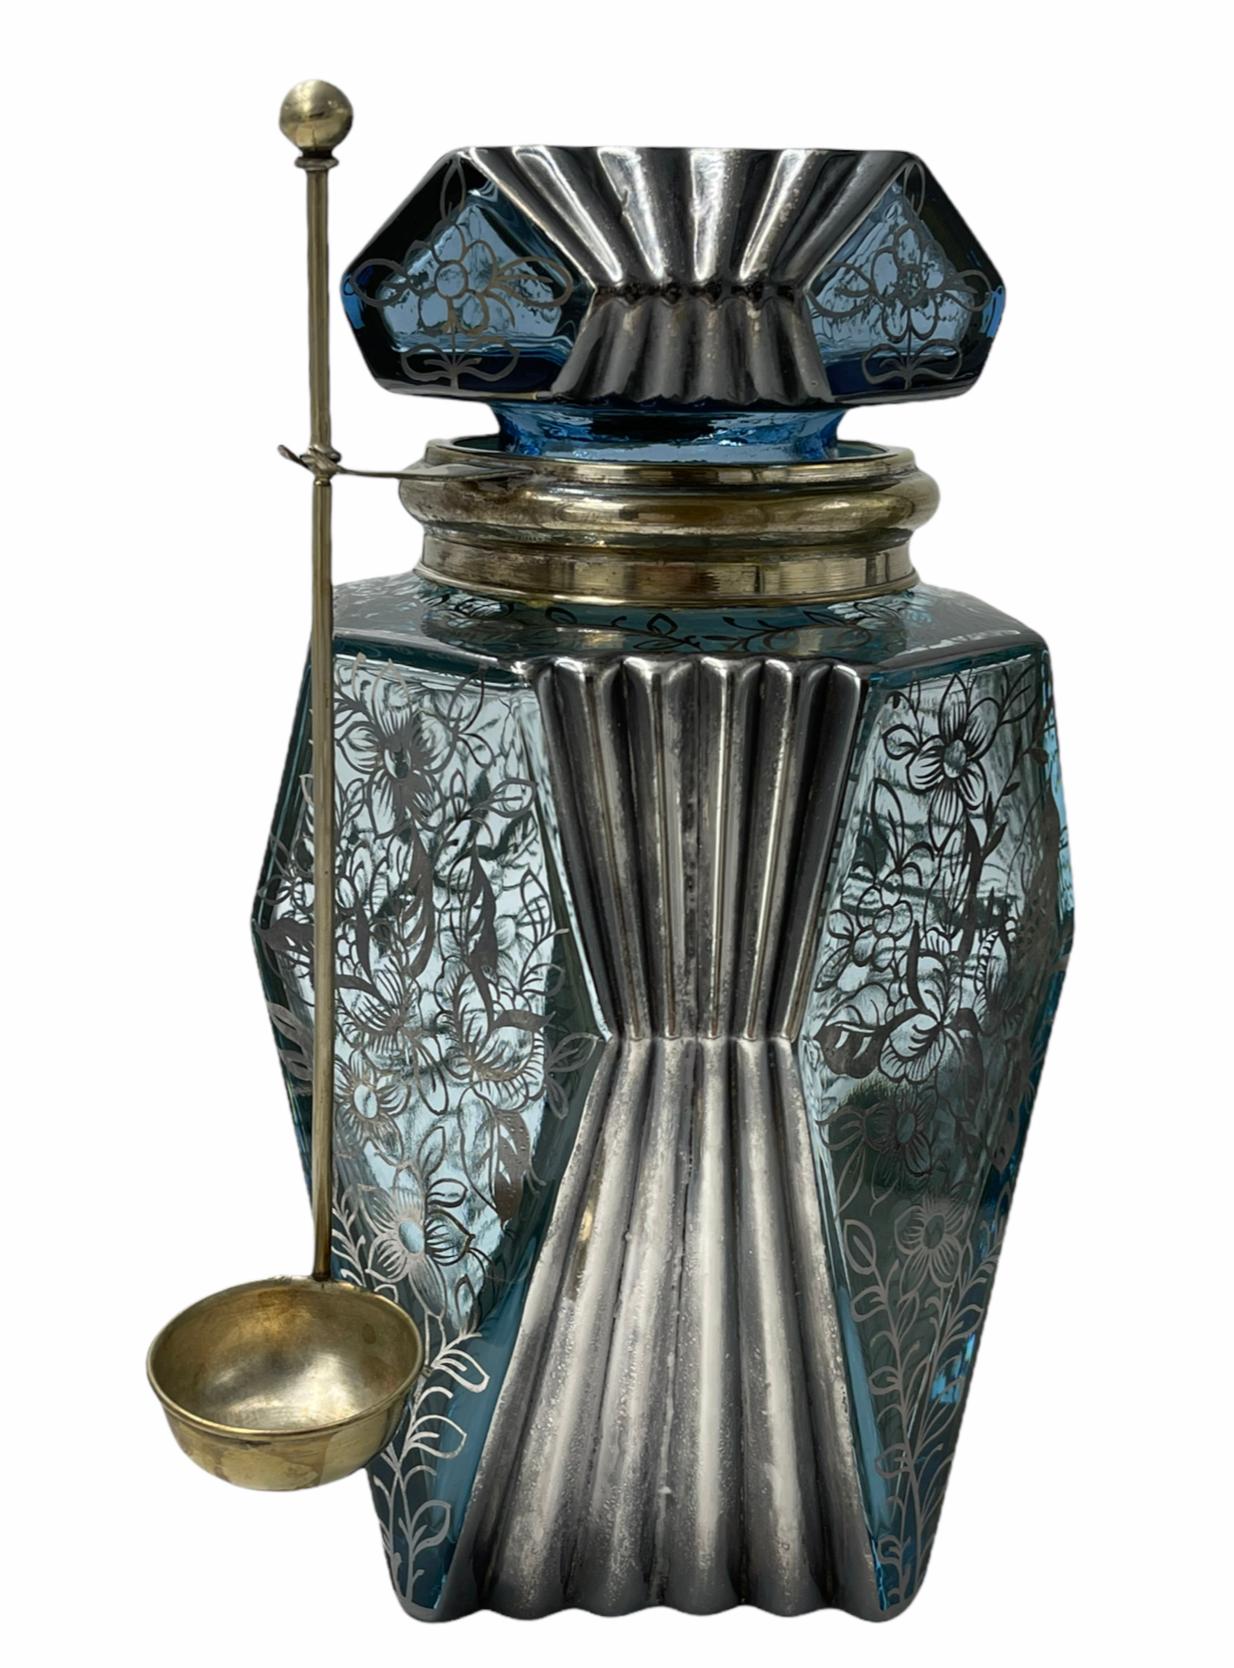 Beautiful Art Deco decanter set in great condition. Would look excellent with a bar set as decoration or for use. Very rare to find such a complete set in such great condition. Comprised of a blue glass olive jar with with a silver plated collar and